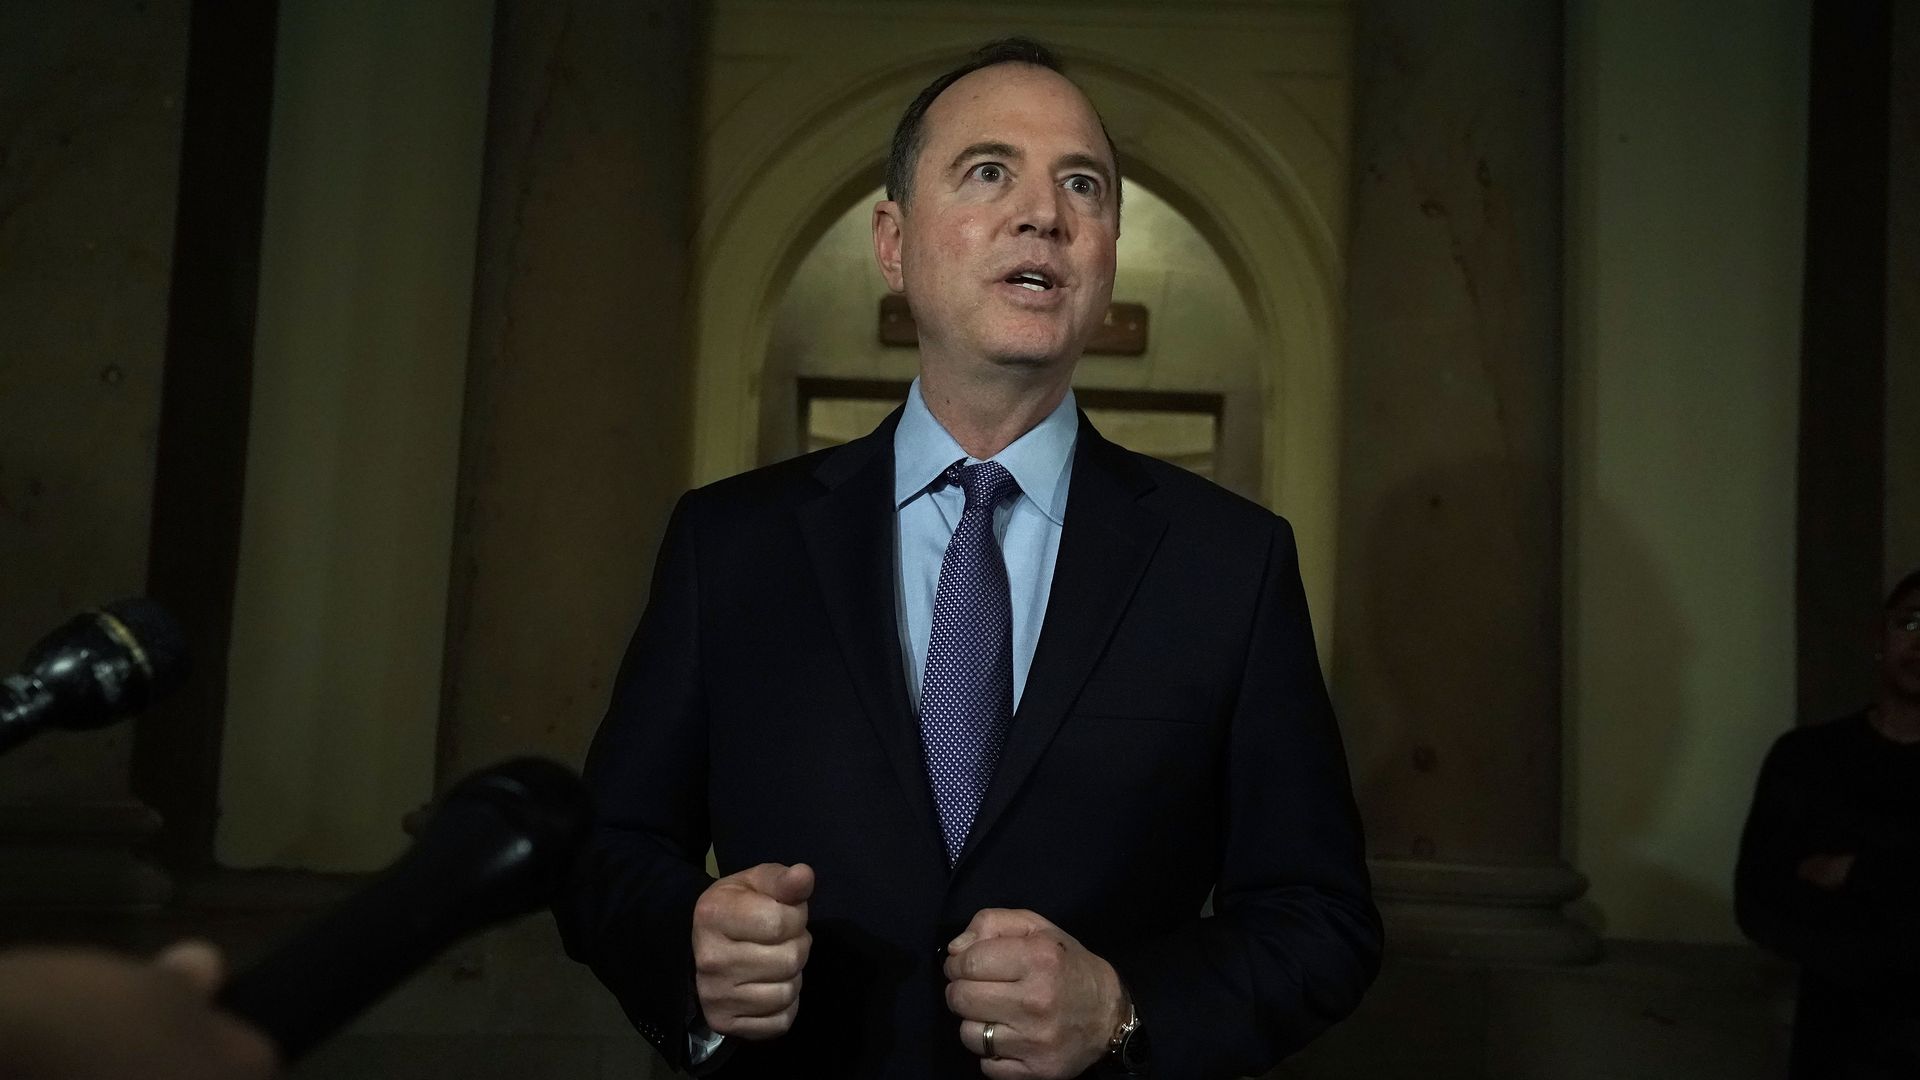 U.S. Rep. Adam Schiff (D-CA), who is part of a Congressional delegation scheduled for an overseas trip, speaks to members of the media January 17, 2019 at the U.S. Capitol in Washington, DC.